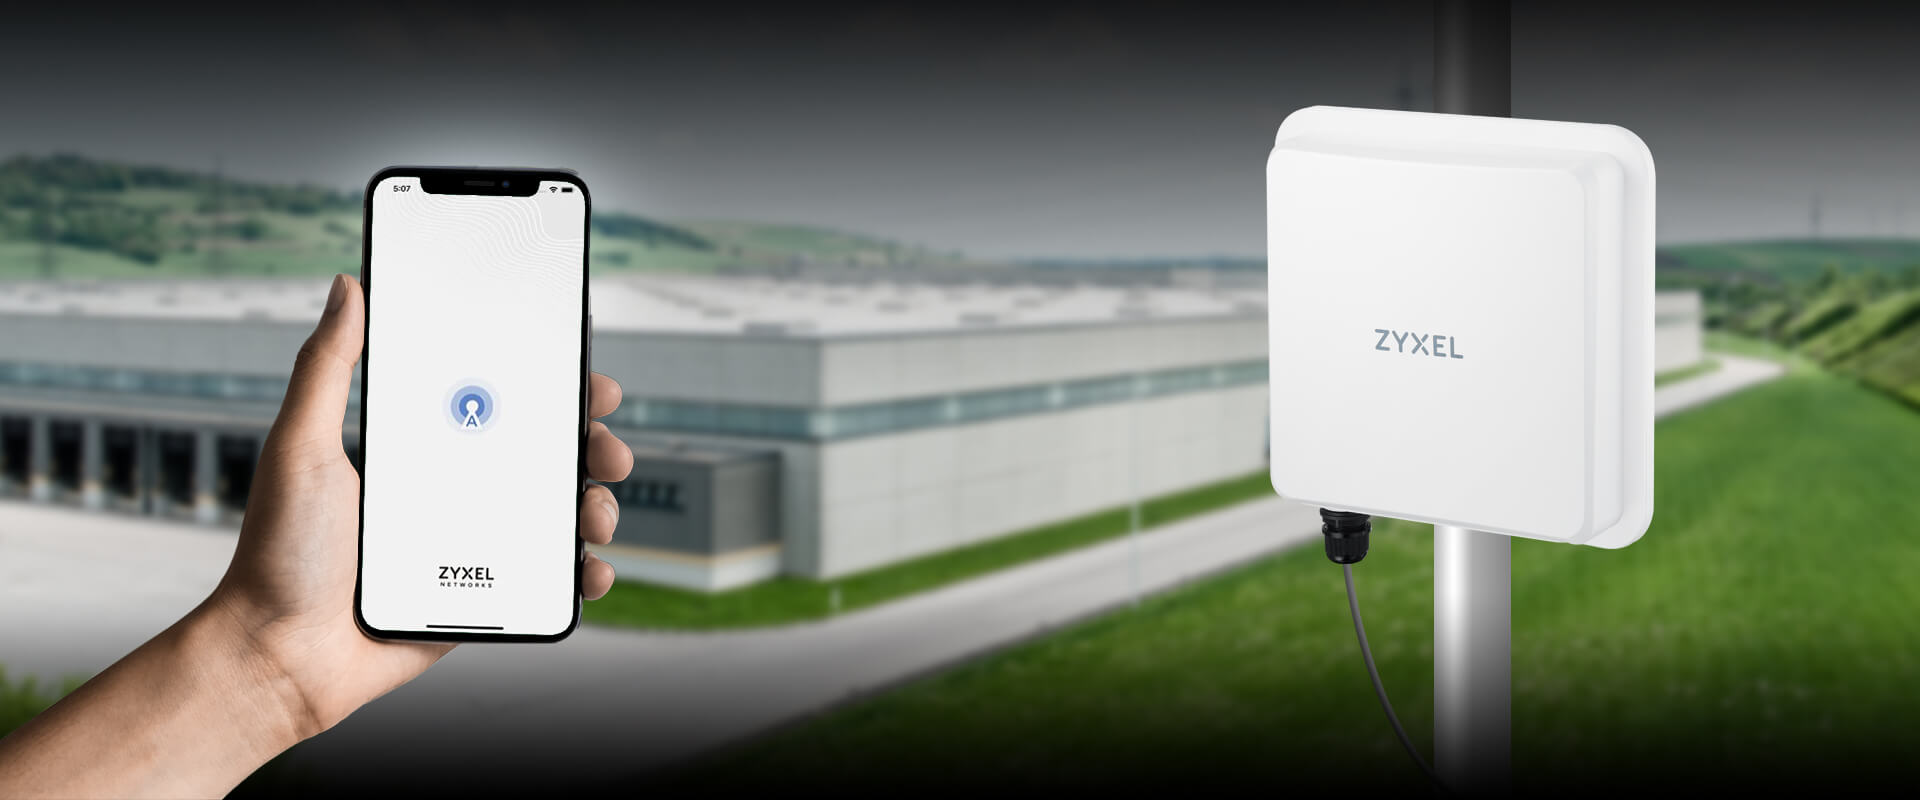 NR7101 - 5G NR Outdoor Router | Zyxel Networks